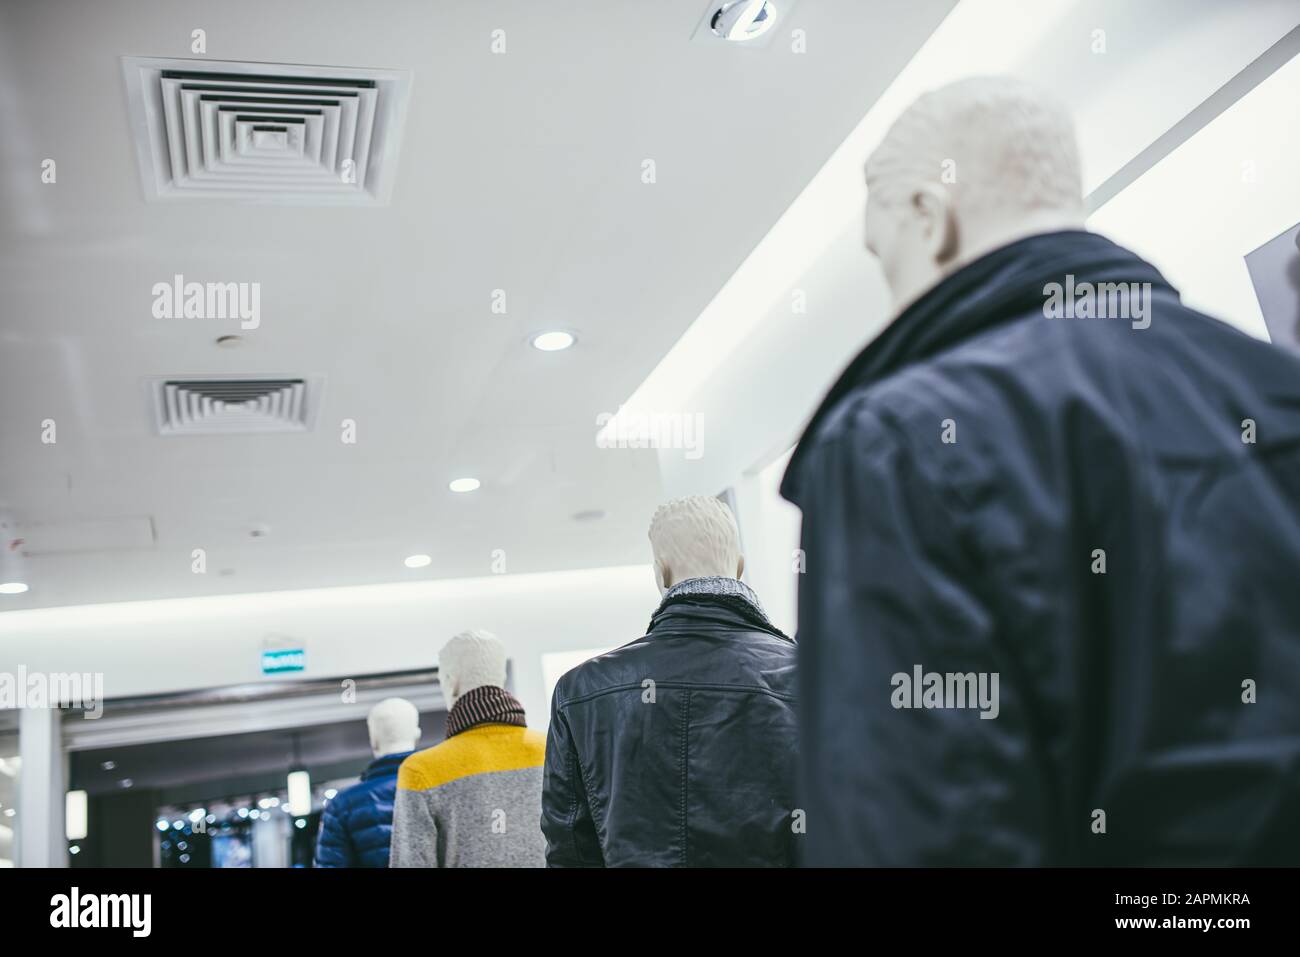 mannequins stand in a row in the store and are dressed in different clothes. Bottom-up view of the ceiling. Stock Photo